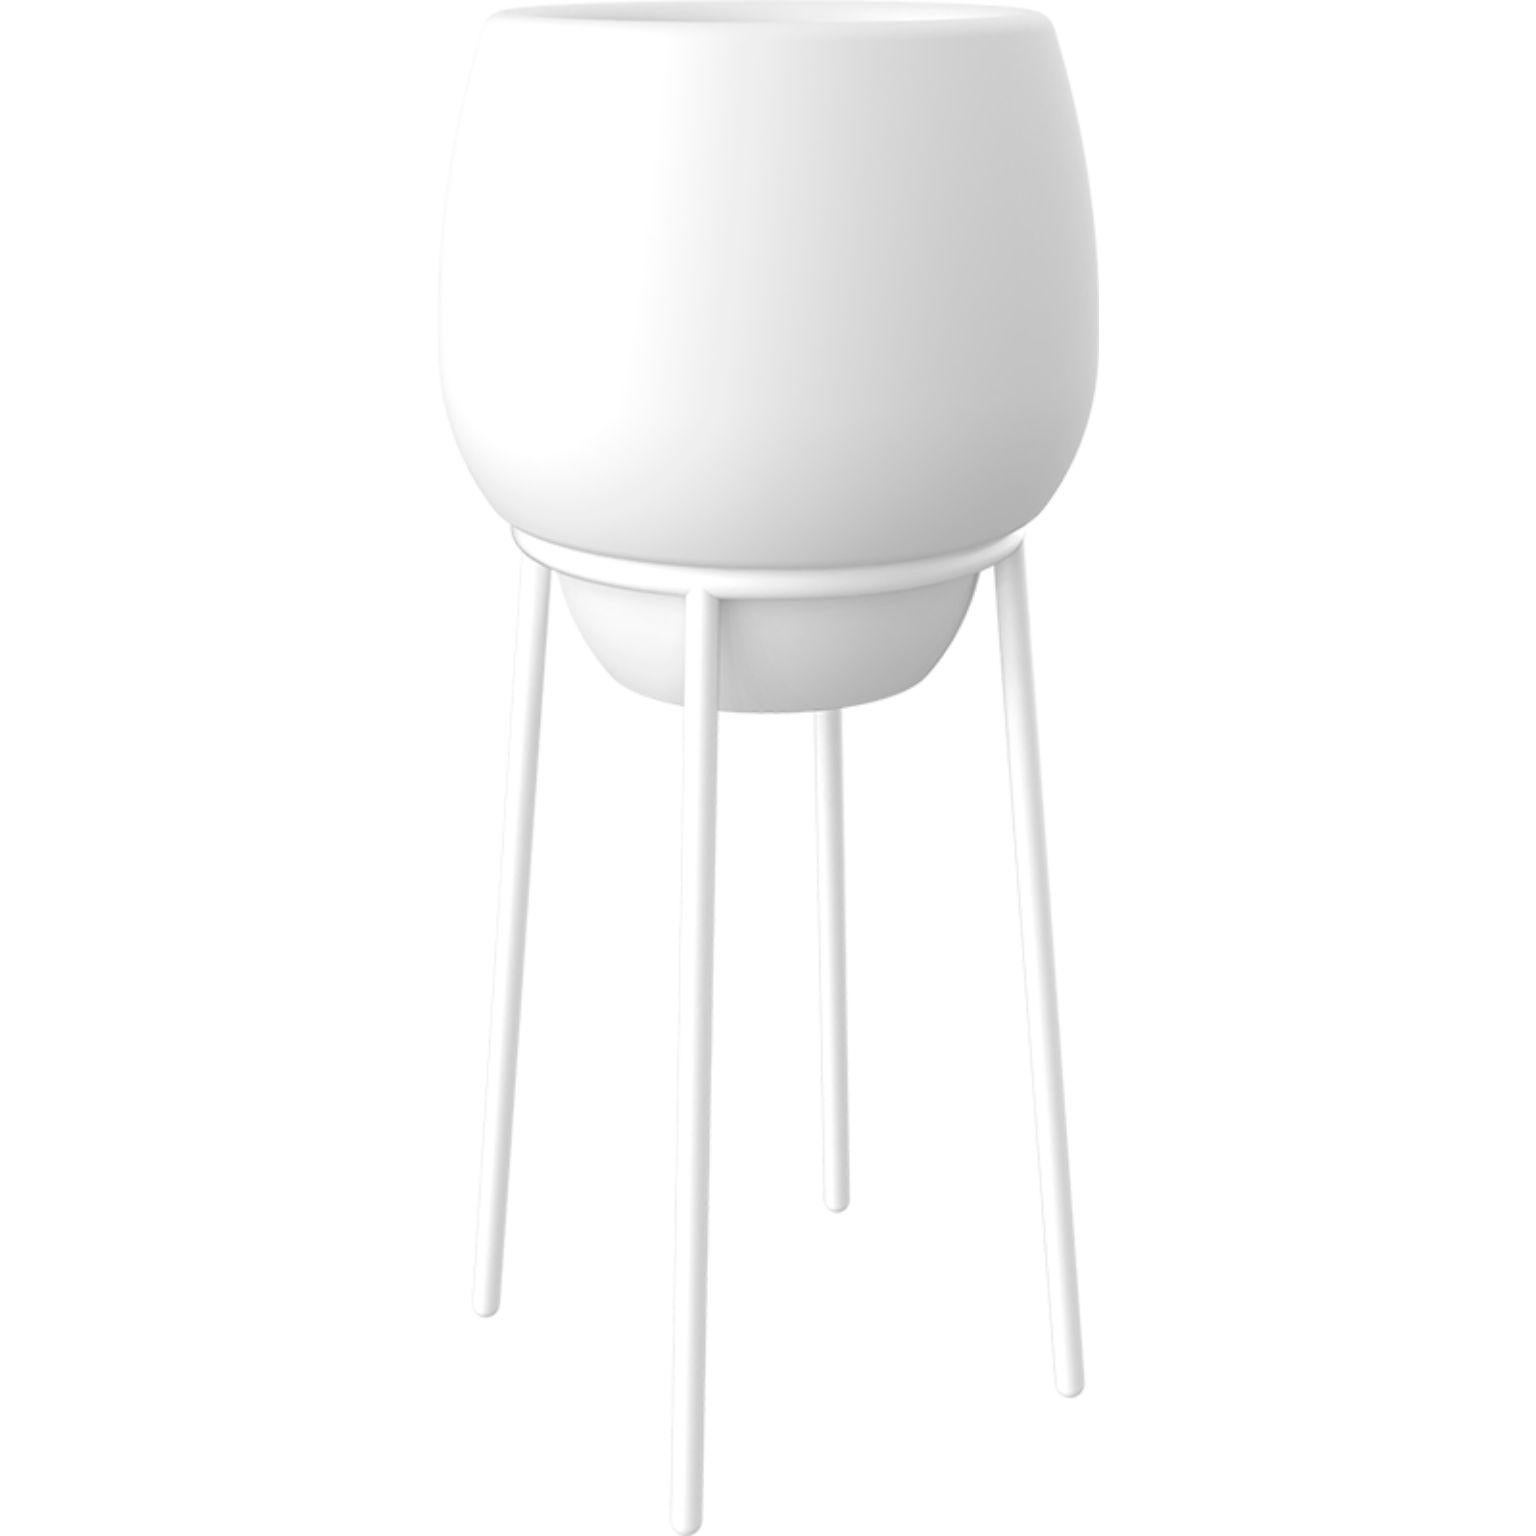 Lace white high 50 Pot by Mowee
Dimensions: Ø55 x H112 cm.
Material: Polyethylene and stainless steel.
Weight: 9 kg.
Also available in different colors and finishes (Lacquered or retroilluminated).

Lace is a collection of furniture made by